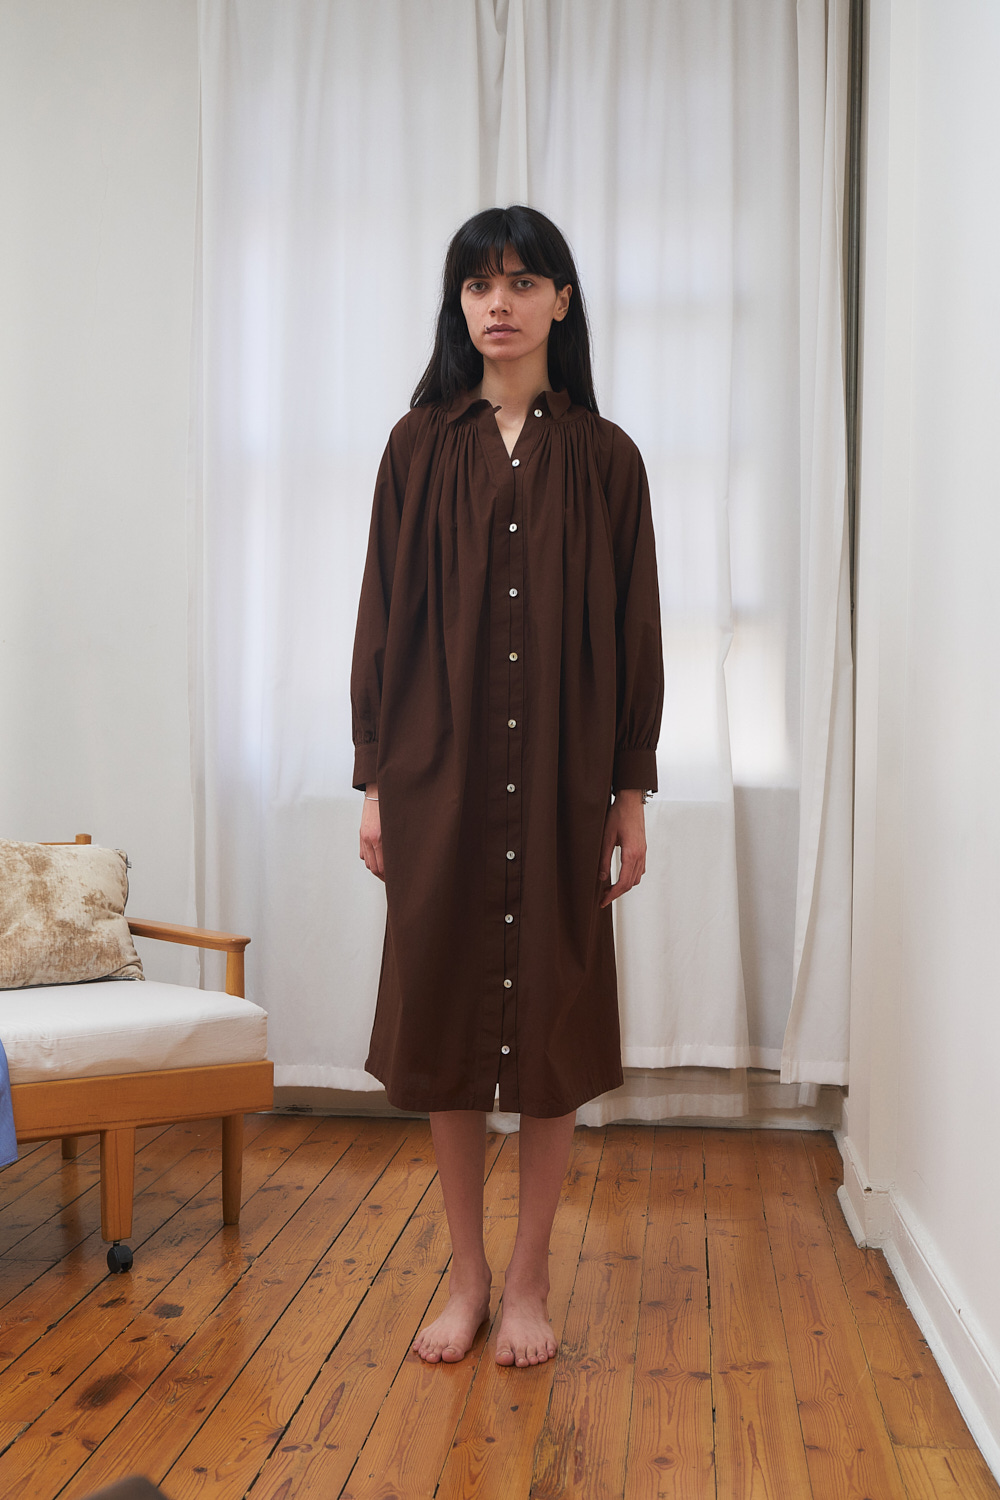 Brown shirt dress with gathered volume on the body. Long sleeves and mid-calf length. org. cotton poplin